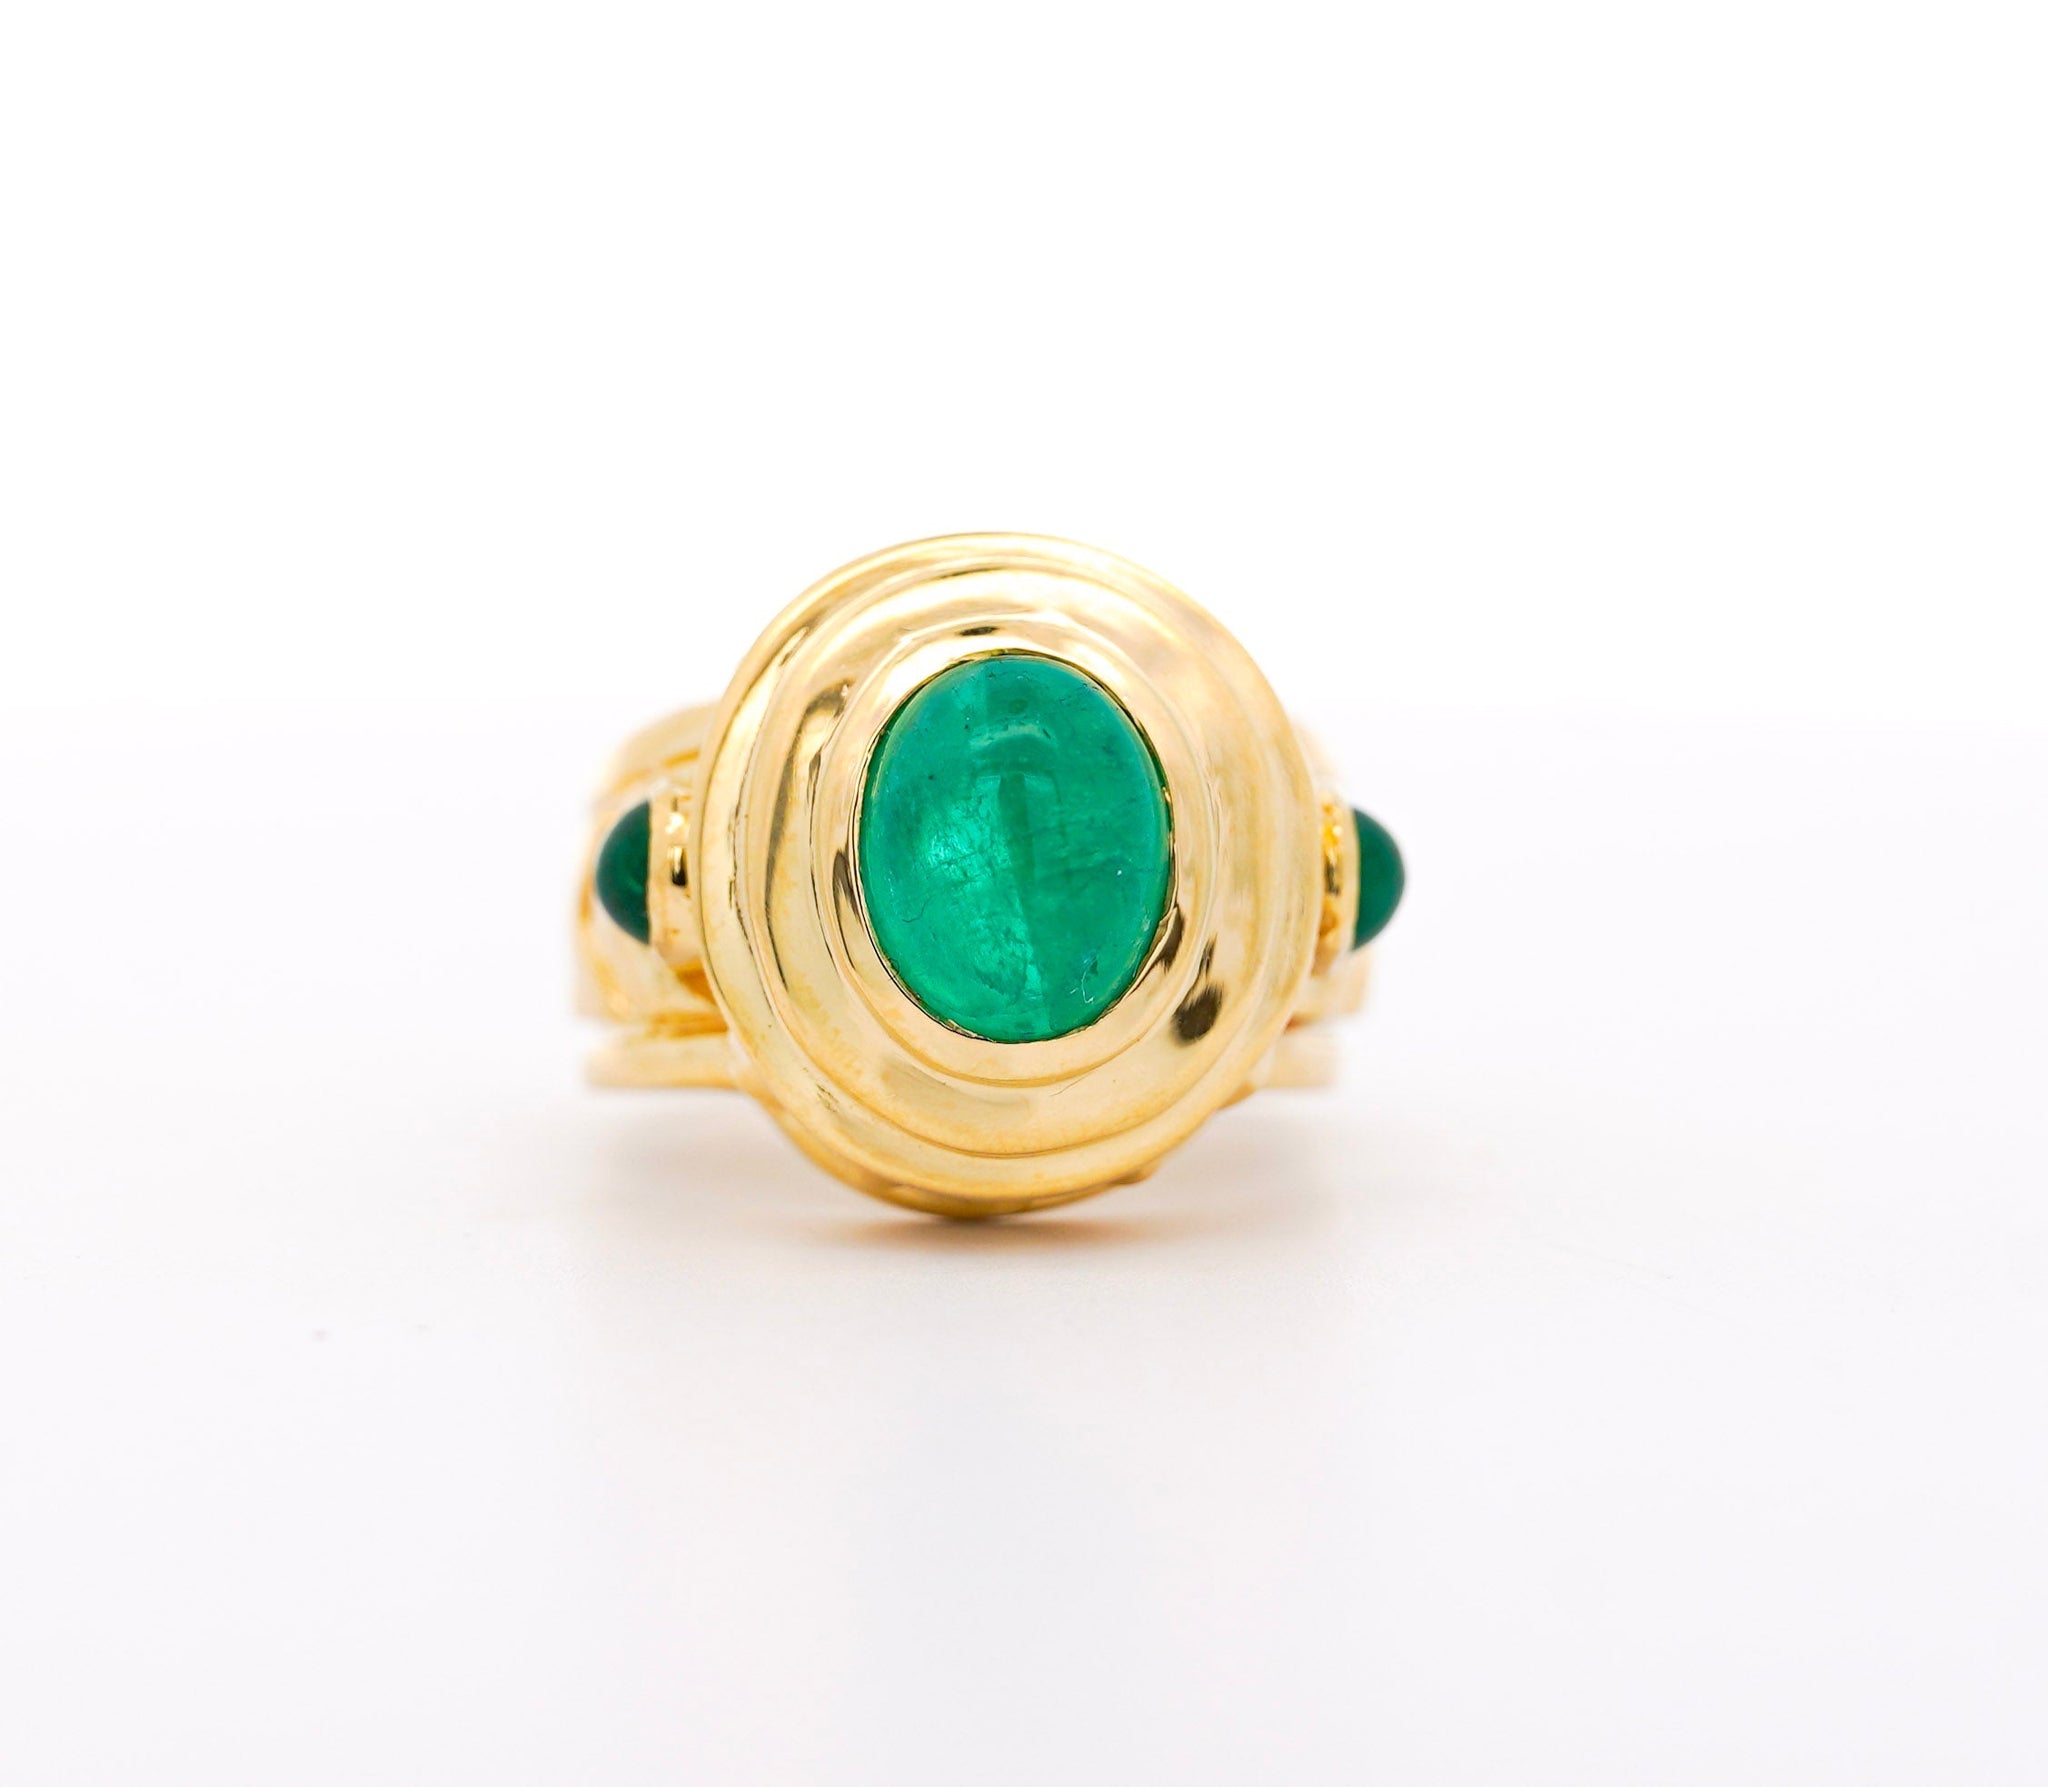 Vintage 3 Carat Cabochon Cut Colombian Emerald Bezel in 20K Yellow Gold Ring